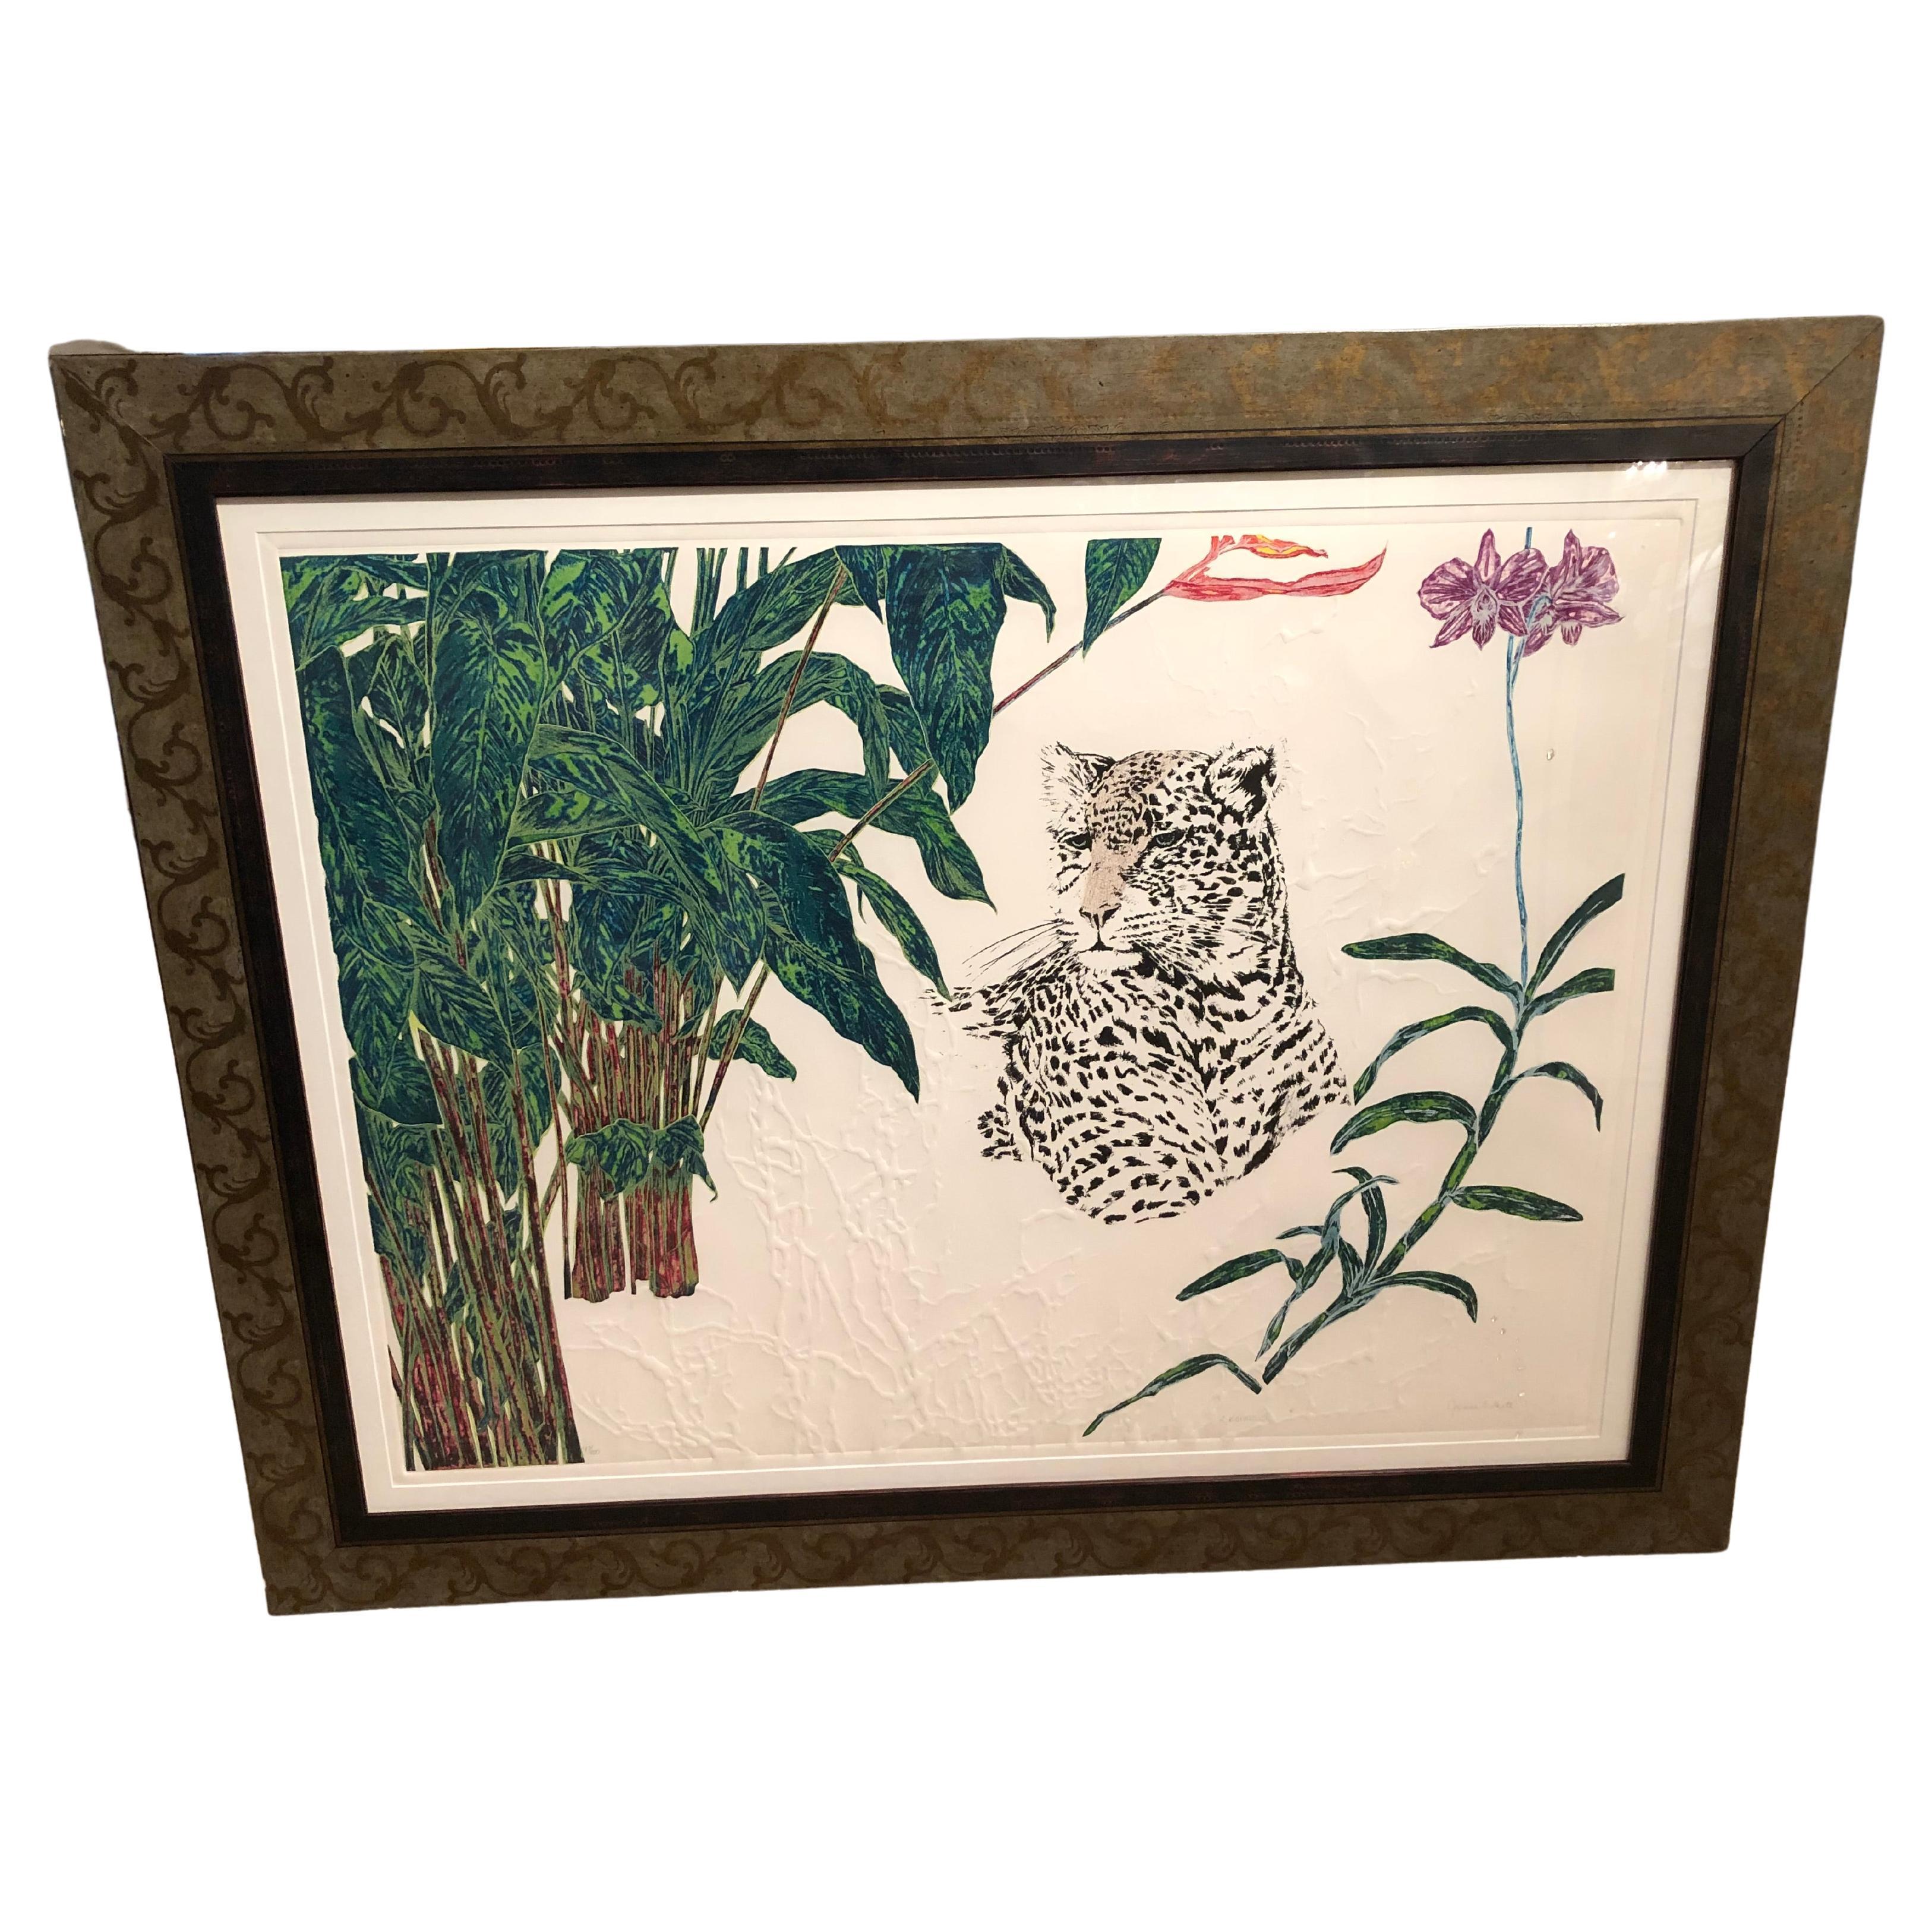 Striking Etching and Embossed Paper Art with Leopard For Sale